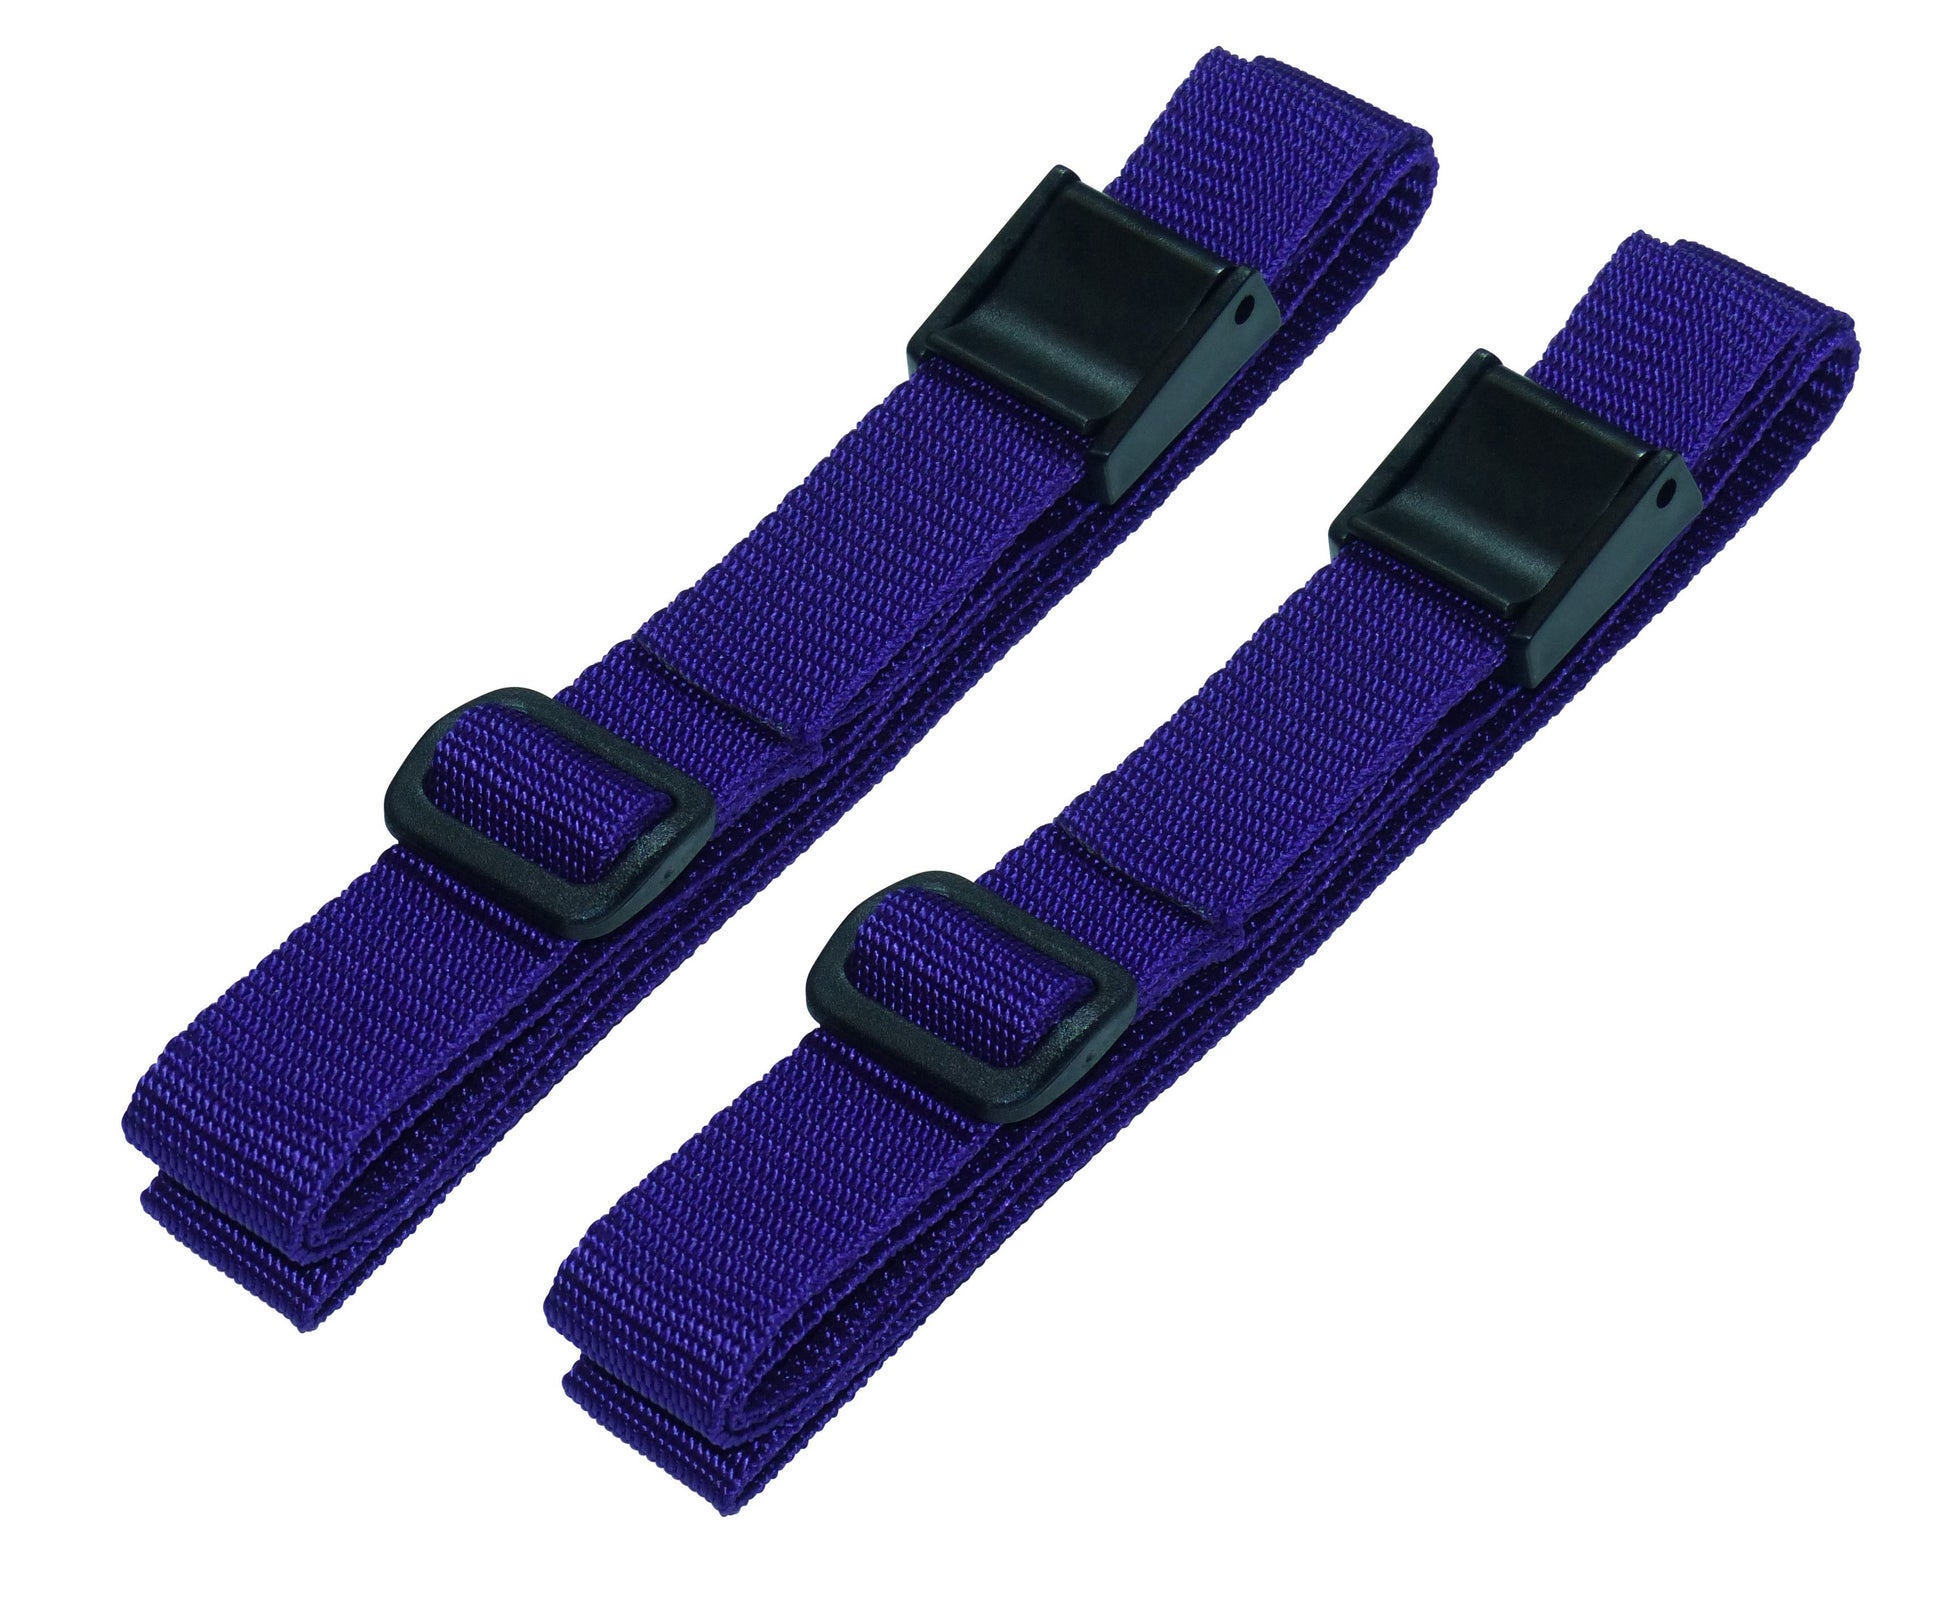 25mm Rivetted Strap with Plastic Cam Buckle & Triglide Buckles (Pair) in blue